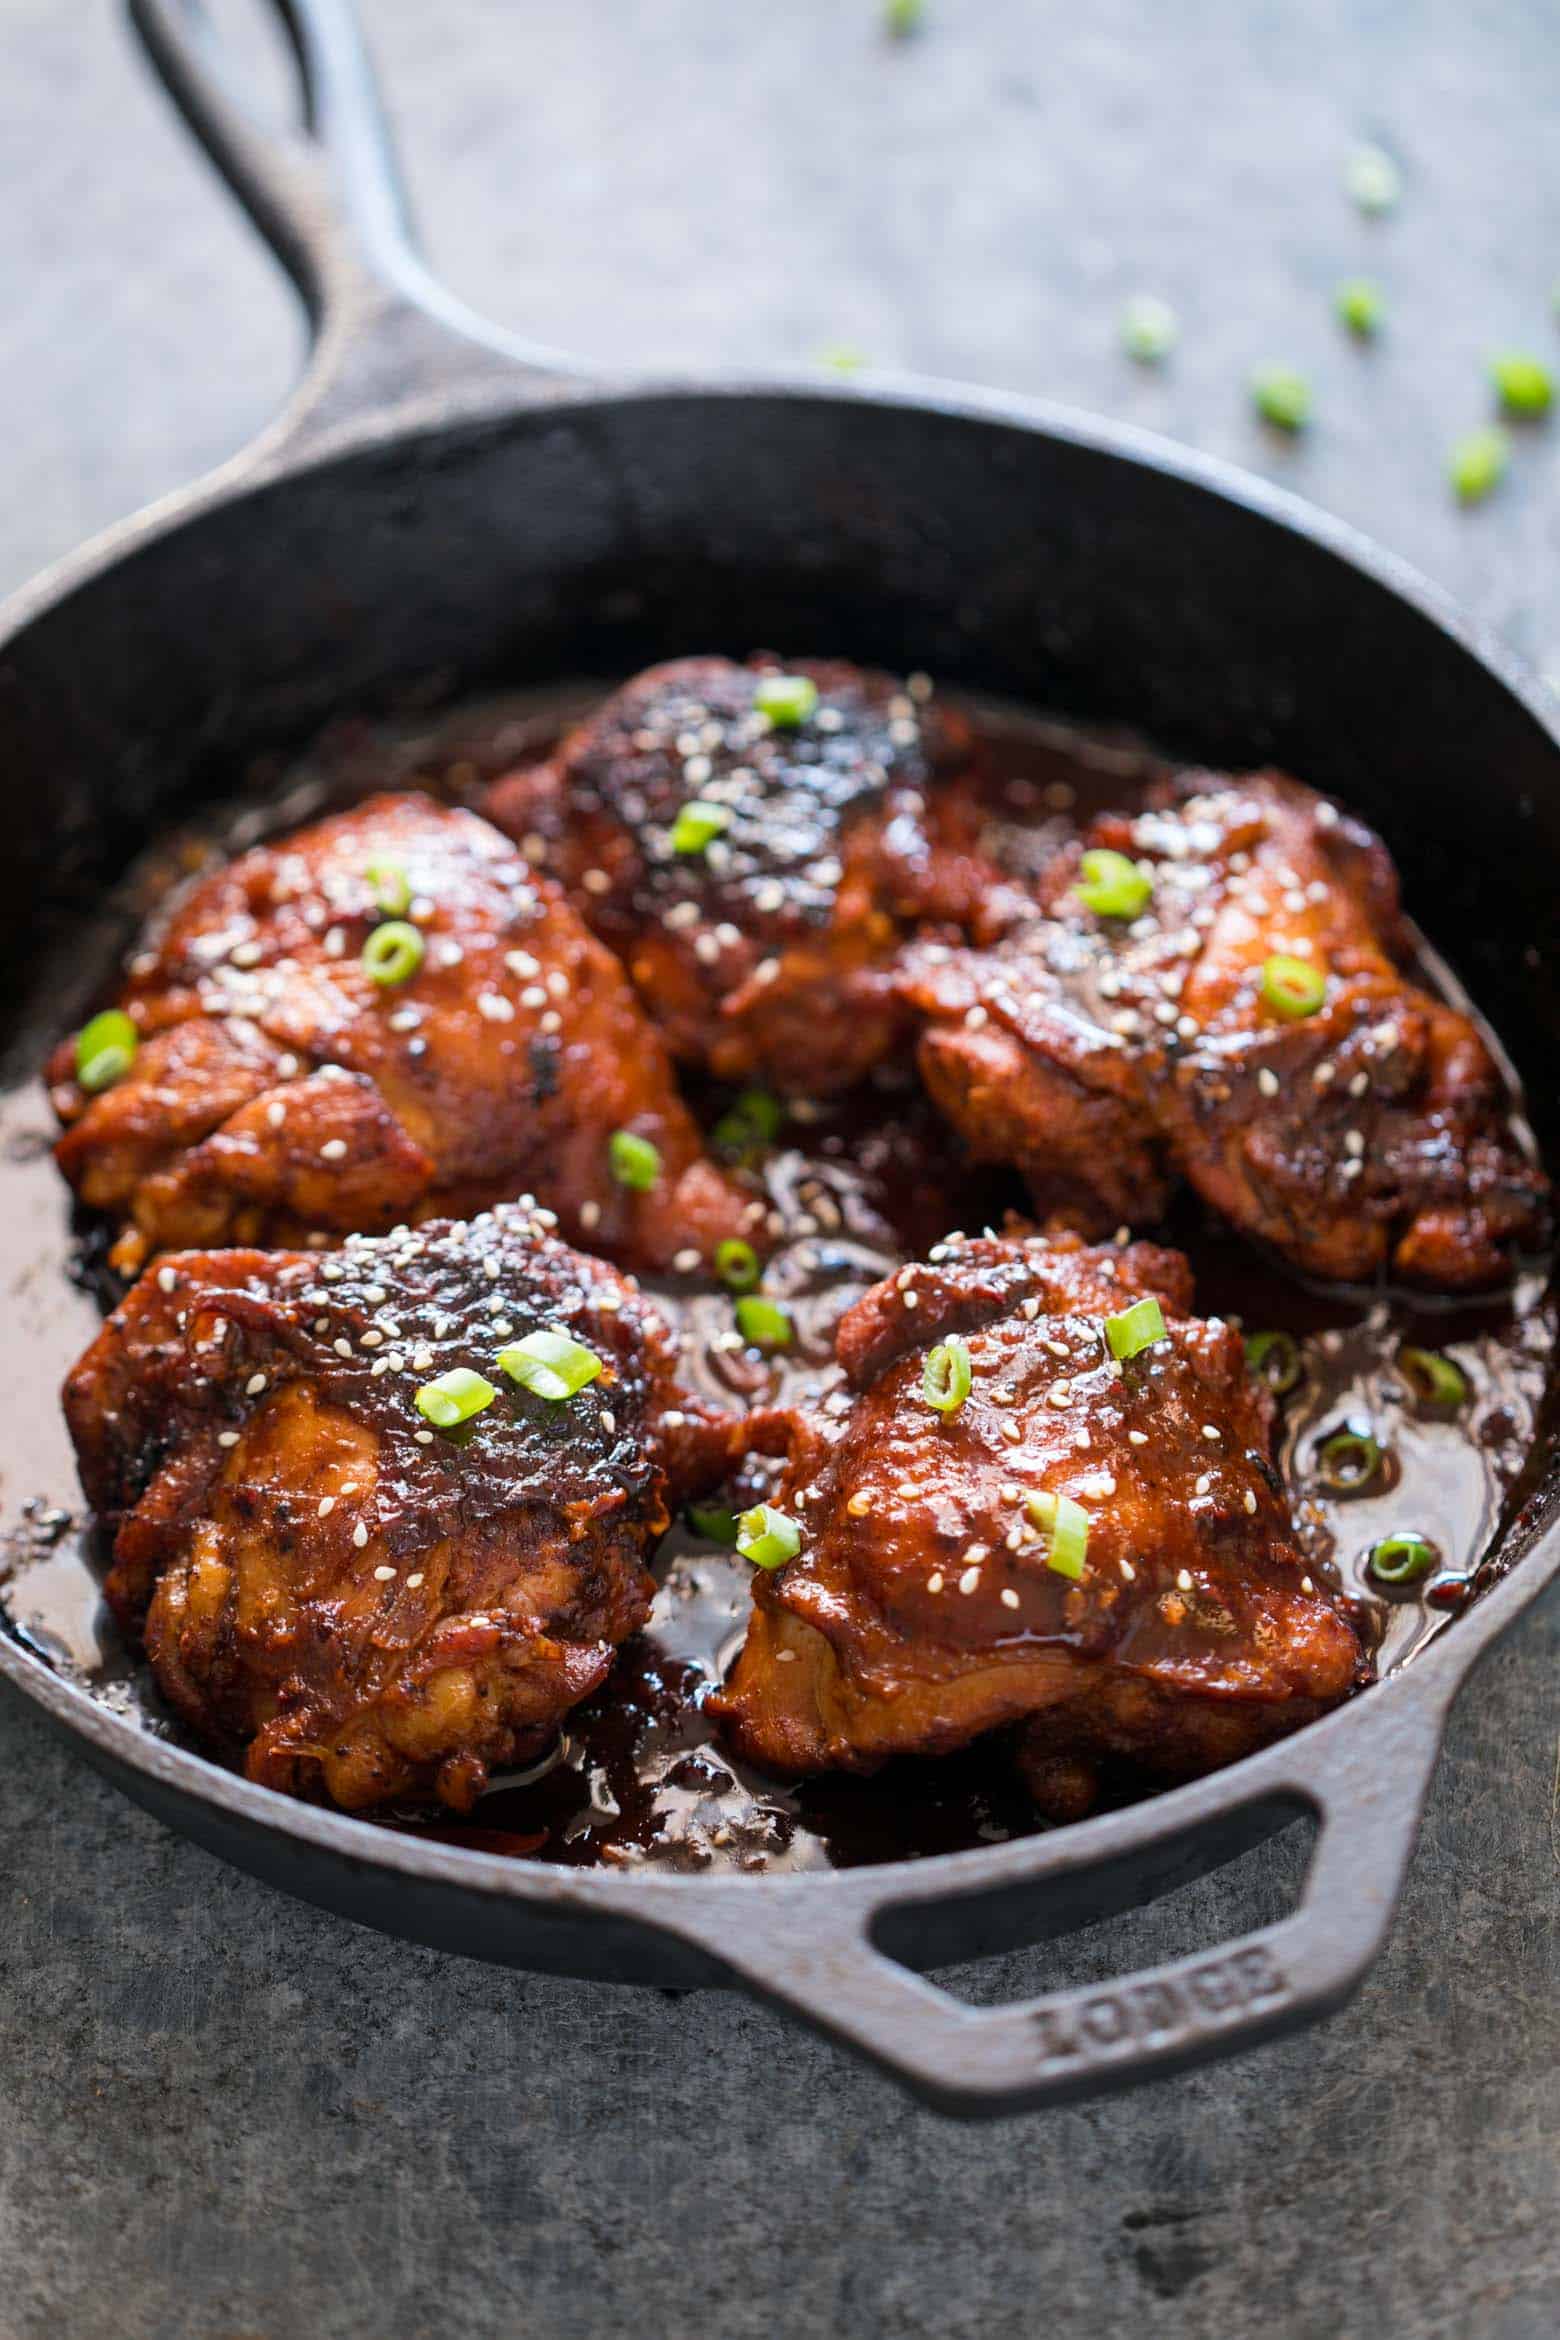 Spicy Korean Chicken Thighs in Gochujang Sauce - an intensely flavoured chicken recipe made in a cast iron pan for extra crispy, juicy thighs and a finger licking marinade!